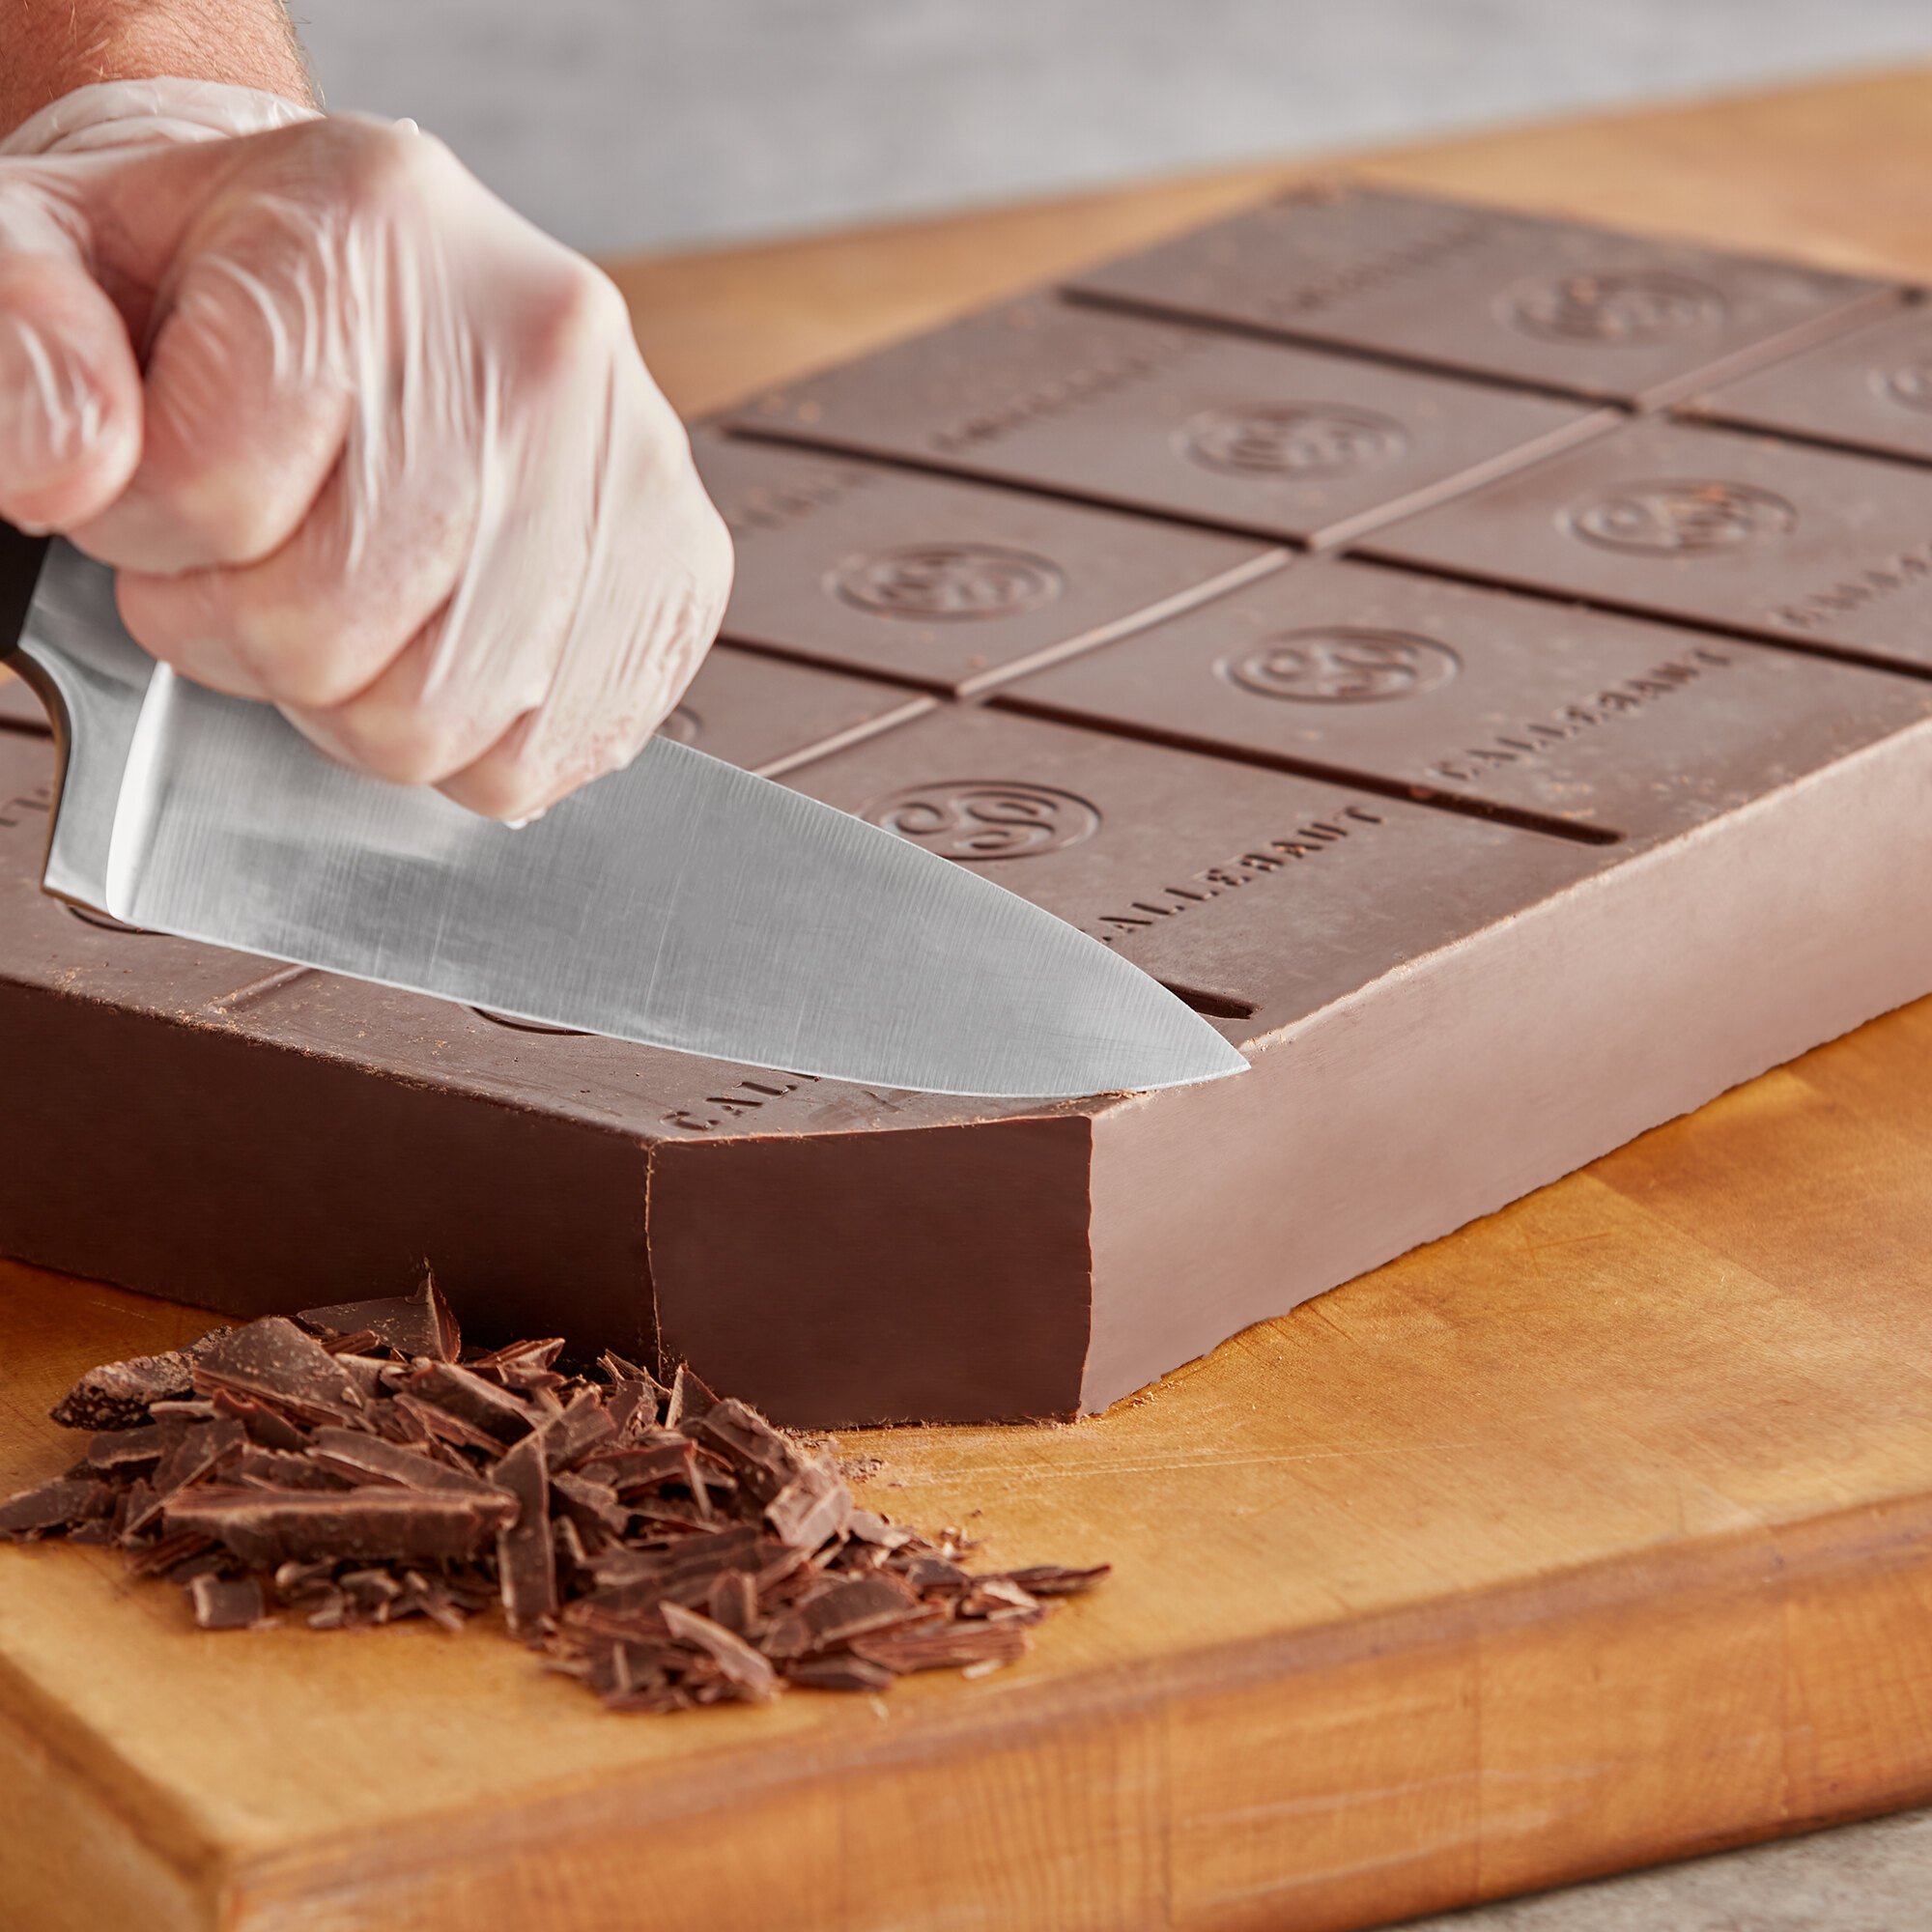 Baker cutting pieces of chocolate off a chocolate block